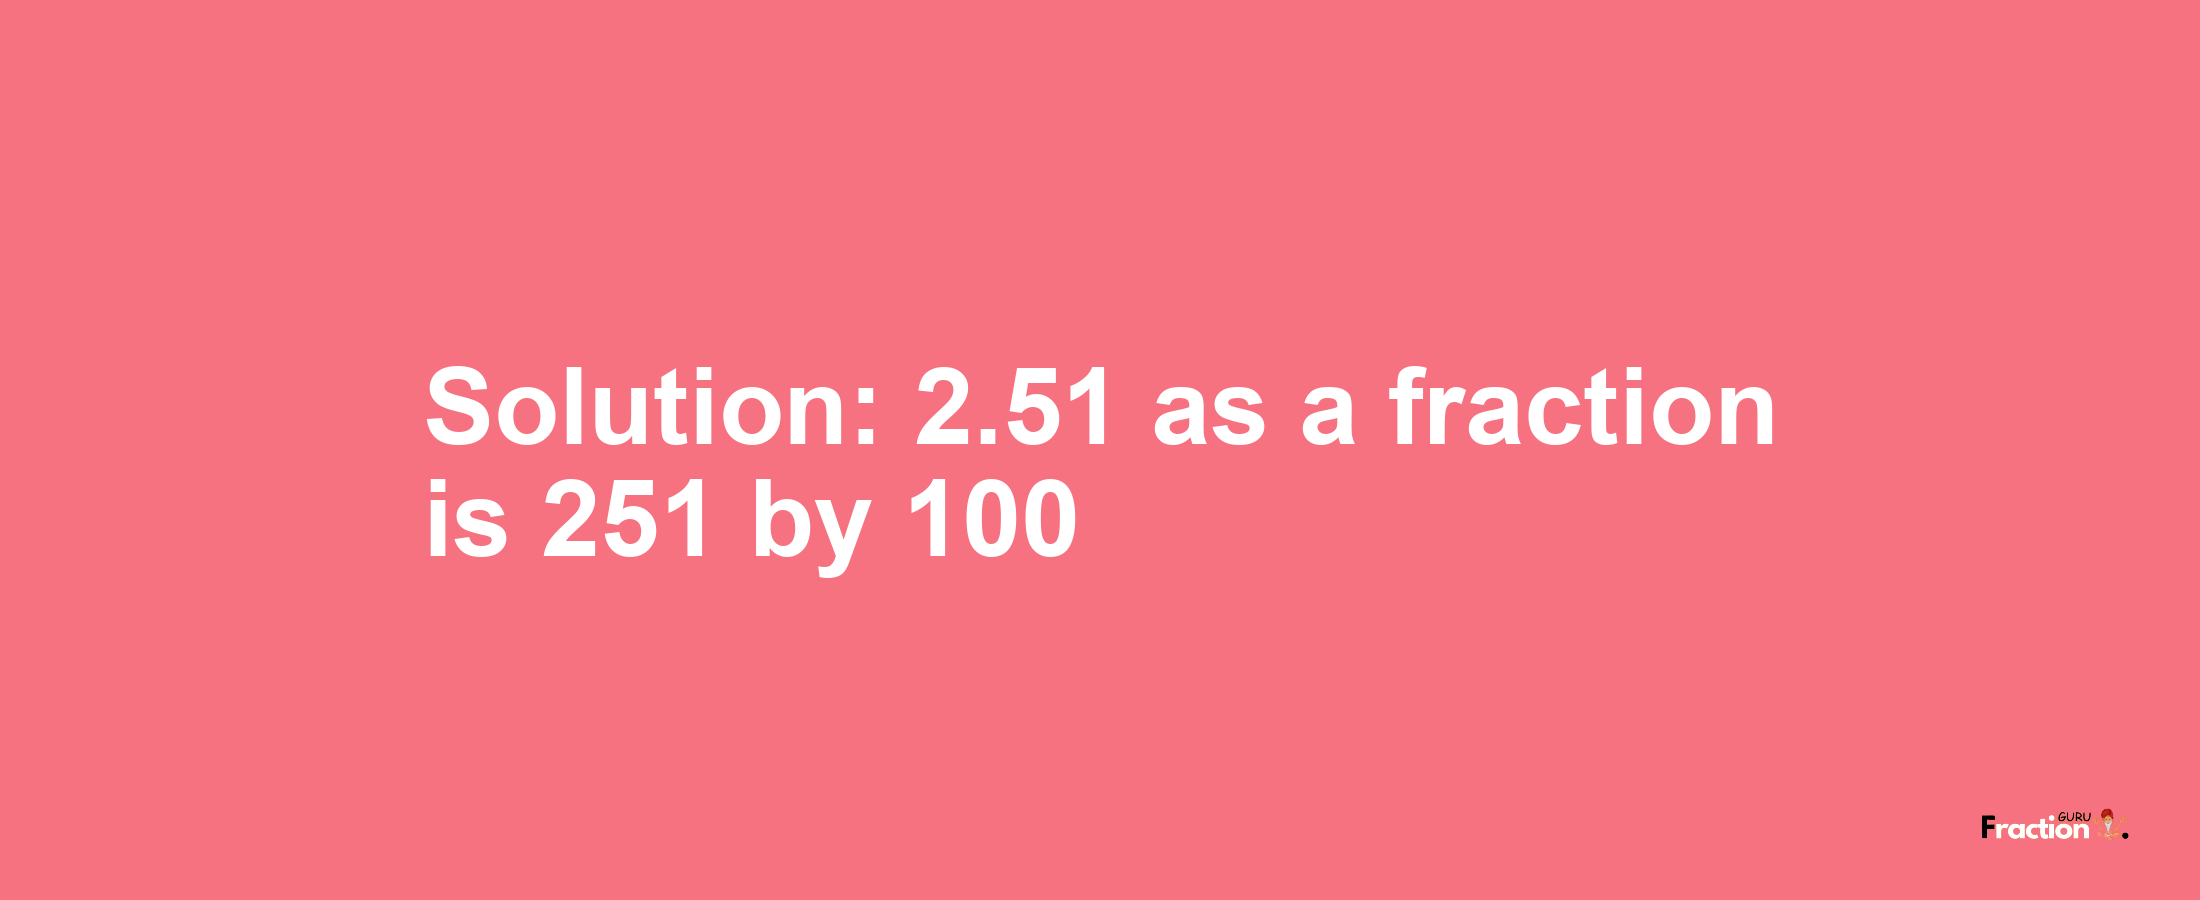 Solution:2.51 as a fraction is 251/100